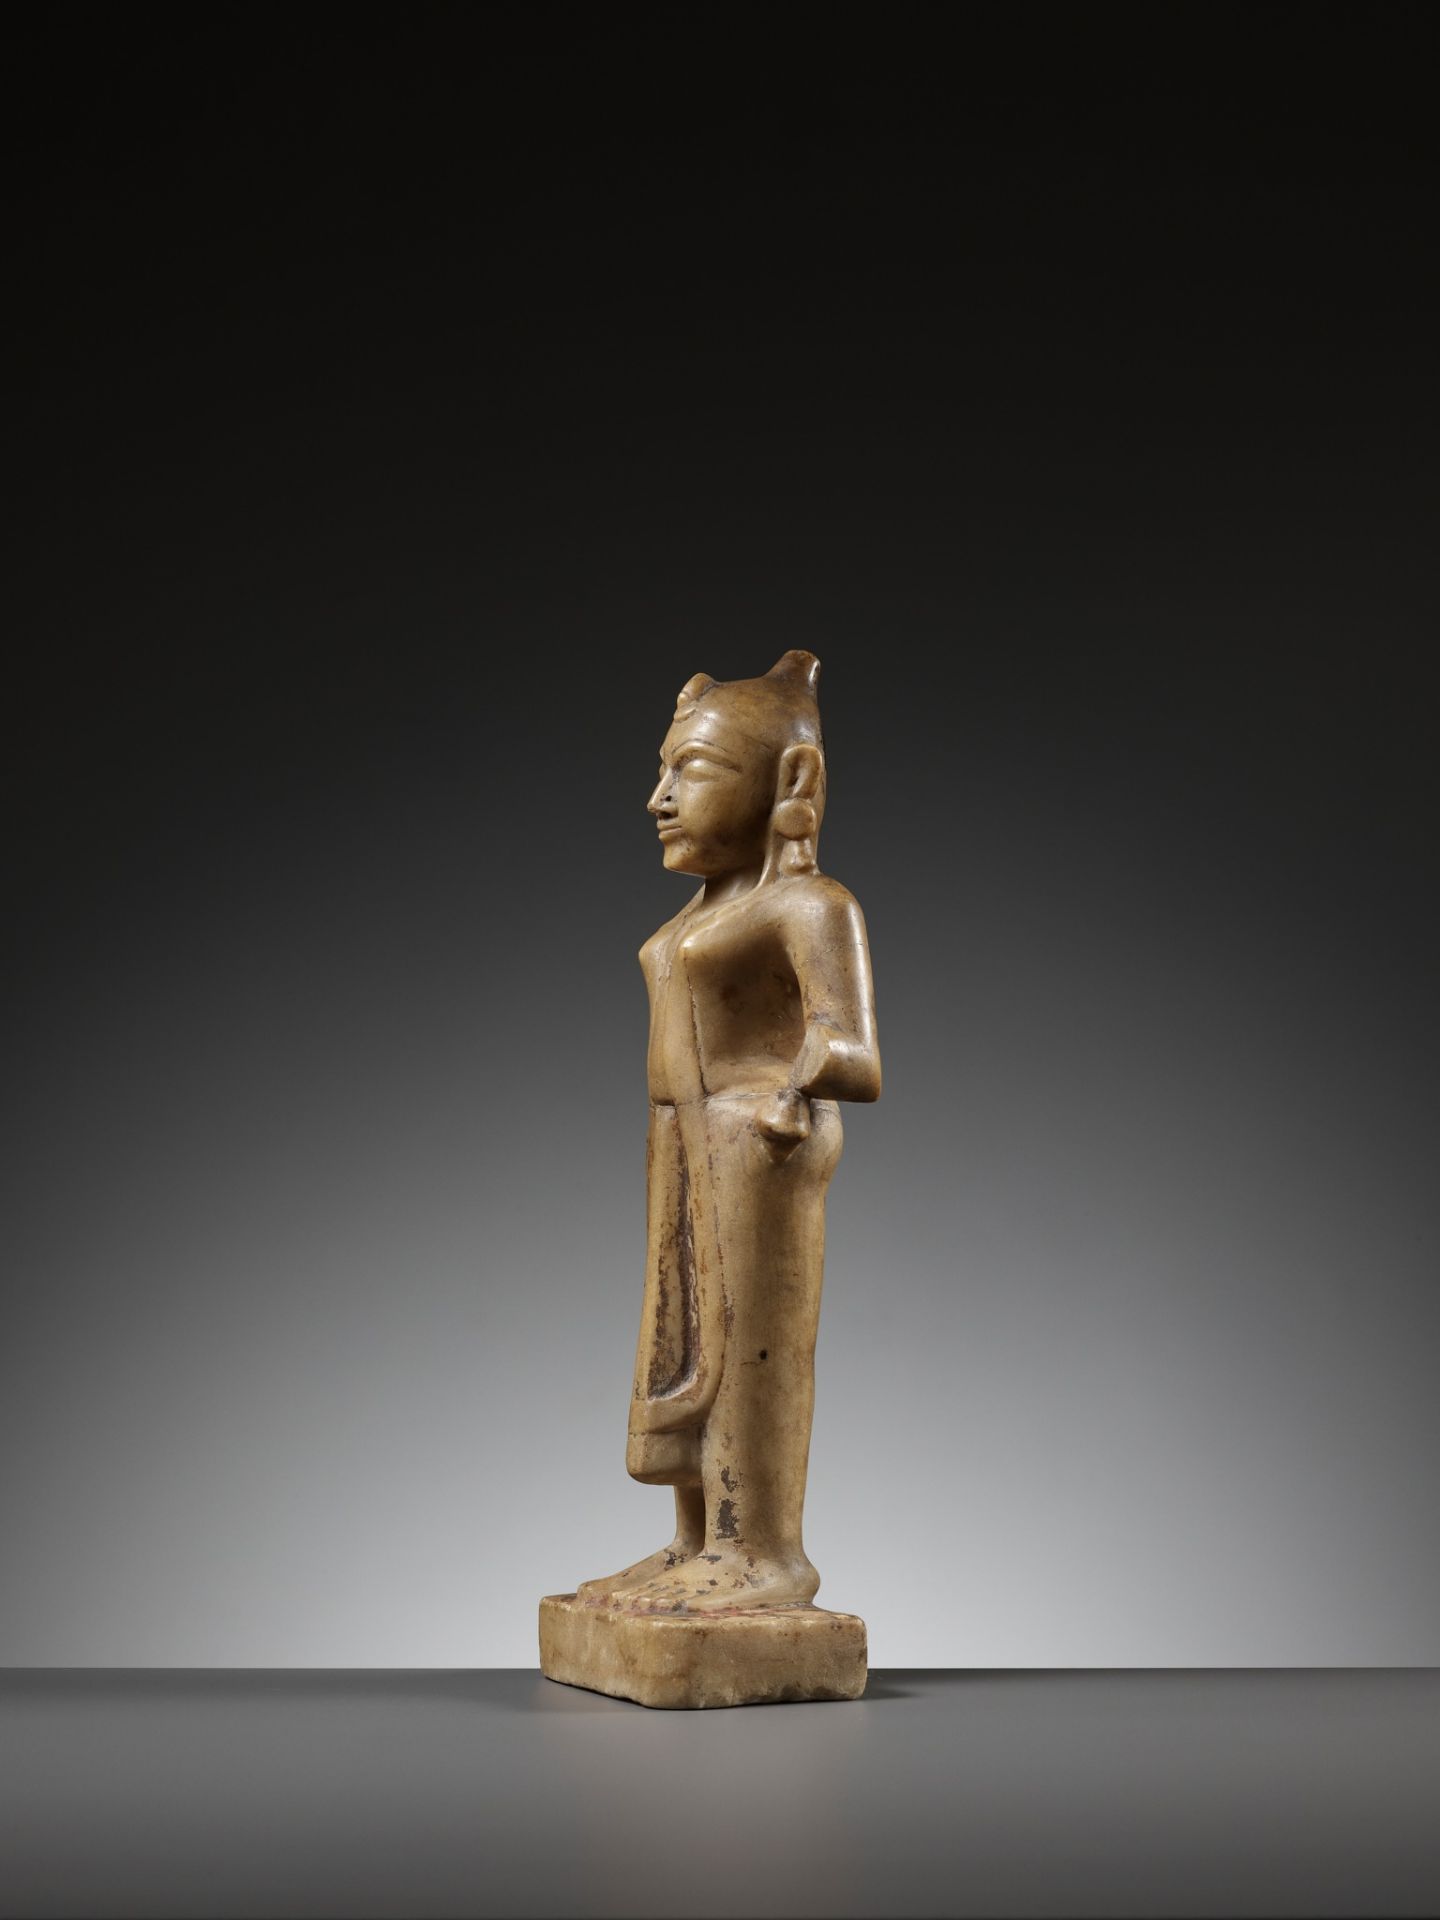 A MARBLE FIGURE OF RADHA, WESTERN INDIA, GUJARAT, 13TH-15TH CENTURY - Image 7 of 13